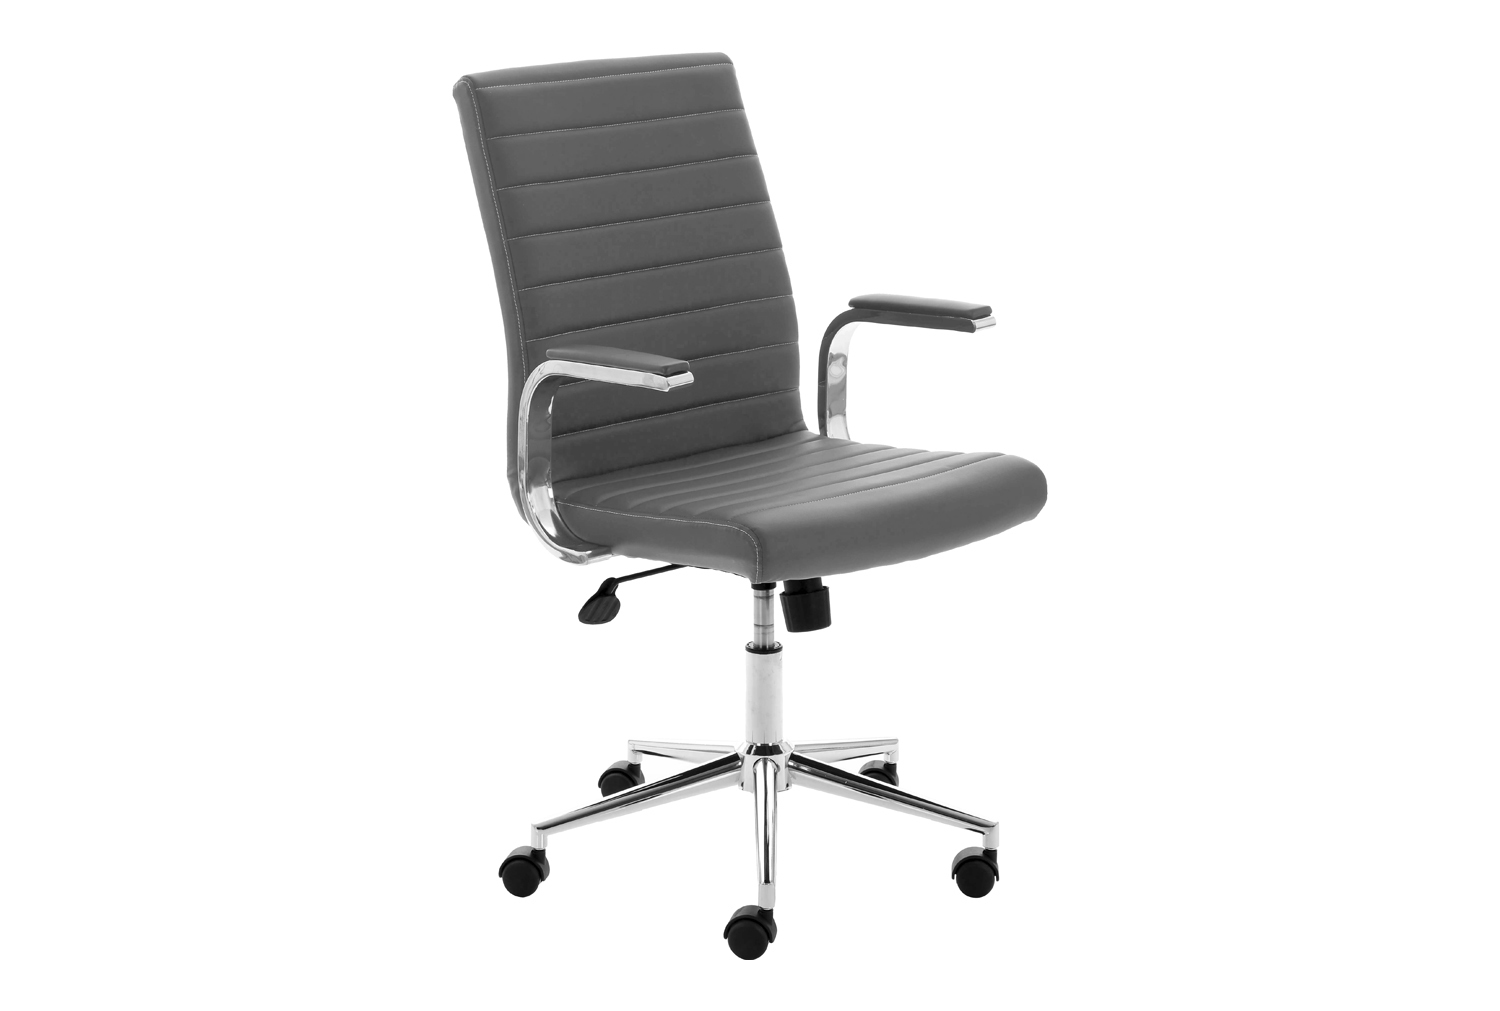 Wexford Executive Bonded Leather Office Chair (Grey)